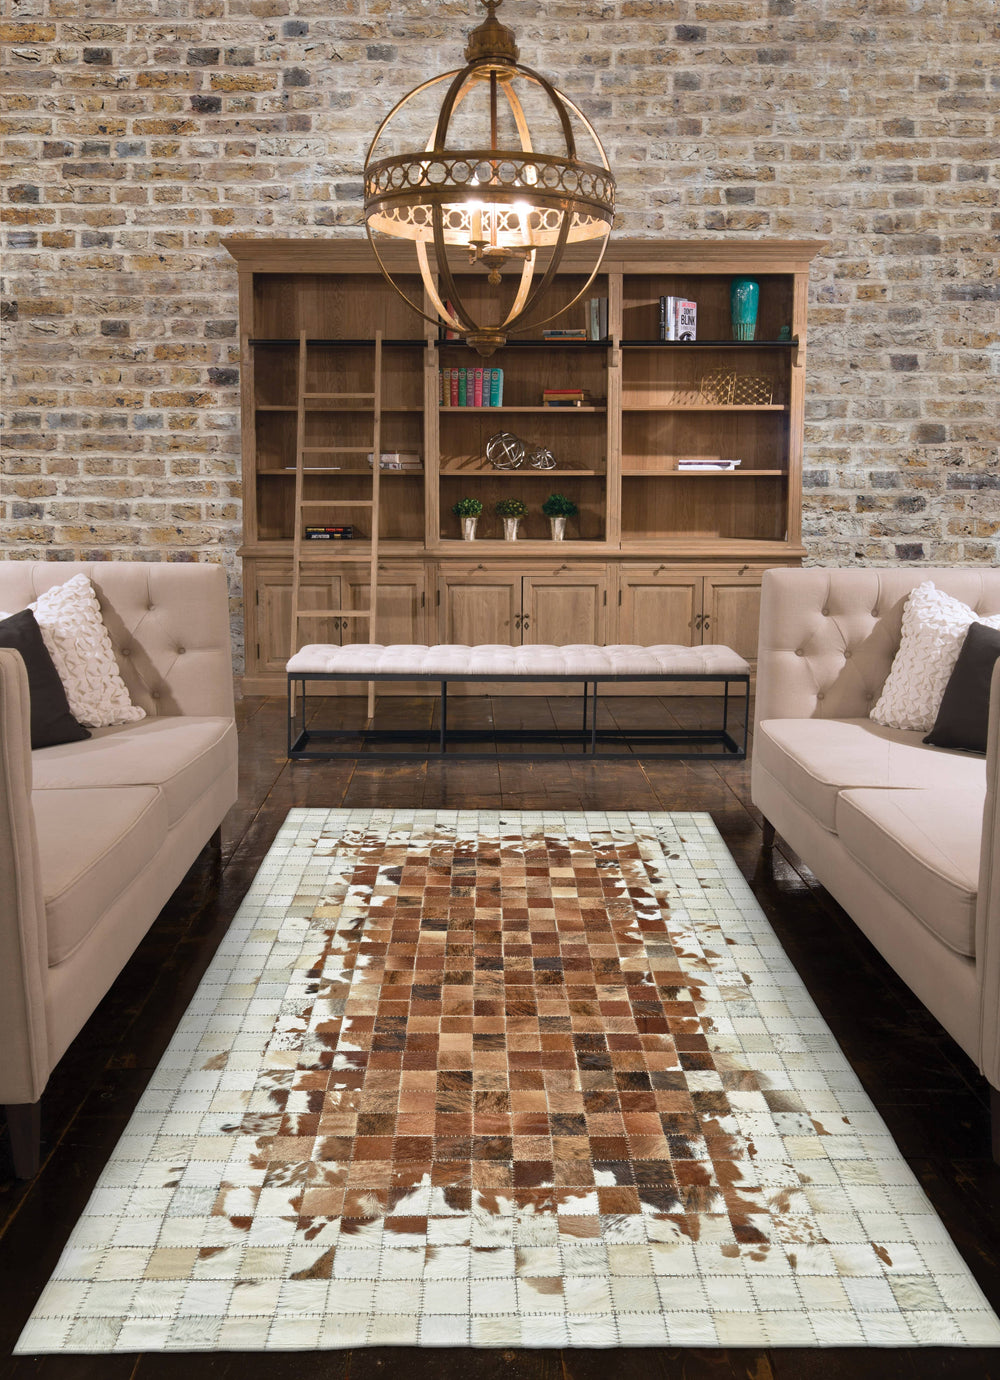 Feizy Feizy Estelle Mosaic Leather Cowhide Rug - Gray & Chocolate Brown - Available in 3 Sizes